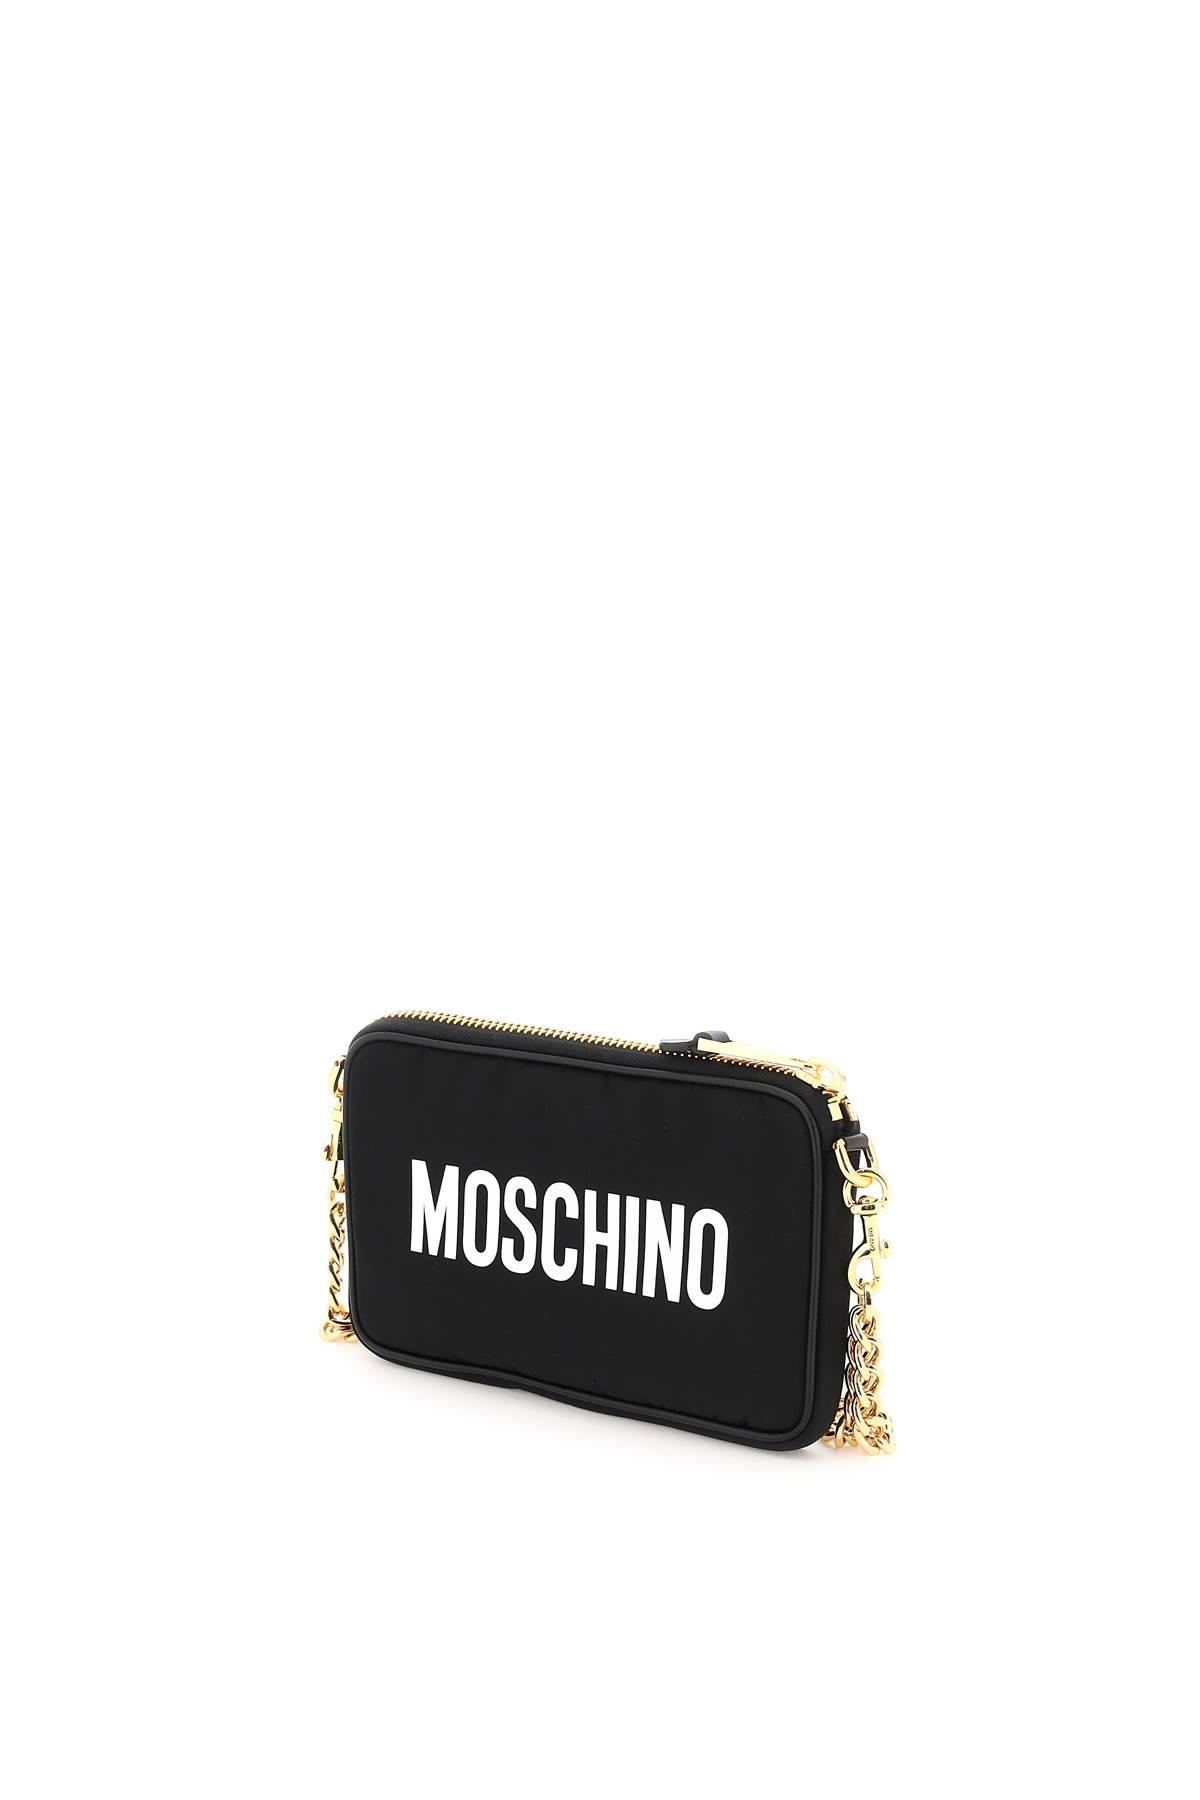 Moschino 'teddy Mirror' Mini Bag With Chain in Black | Lyst